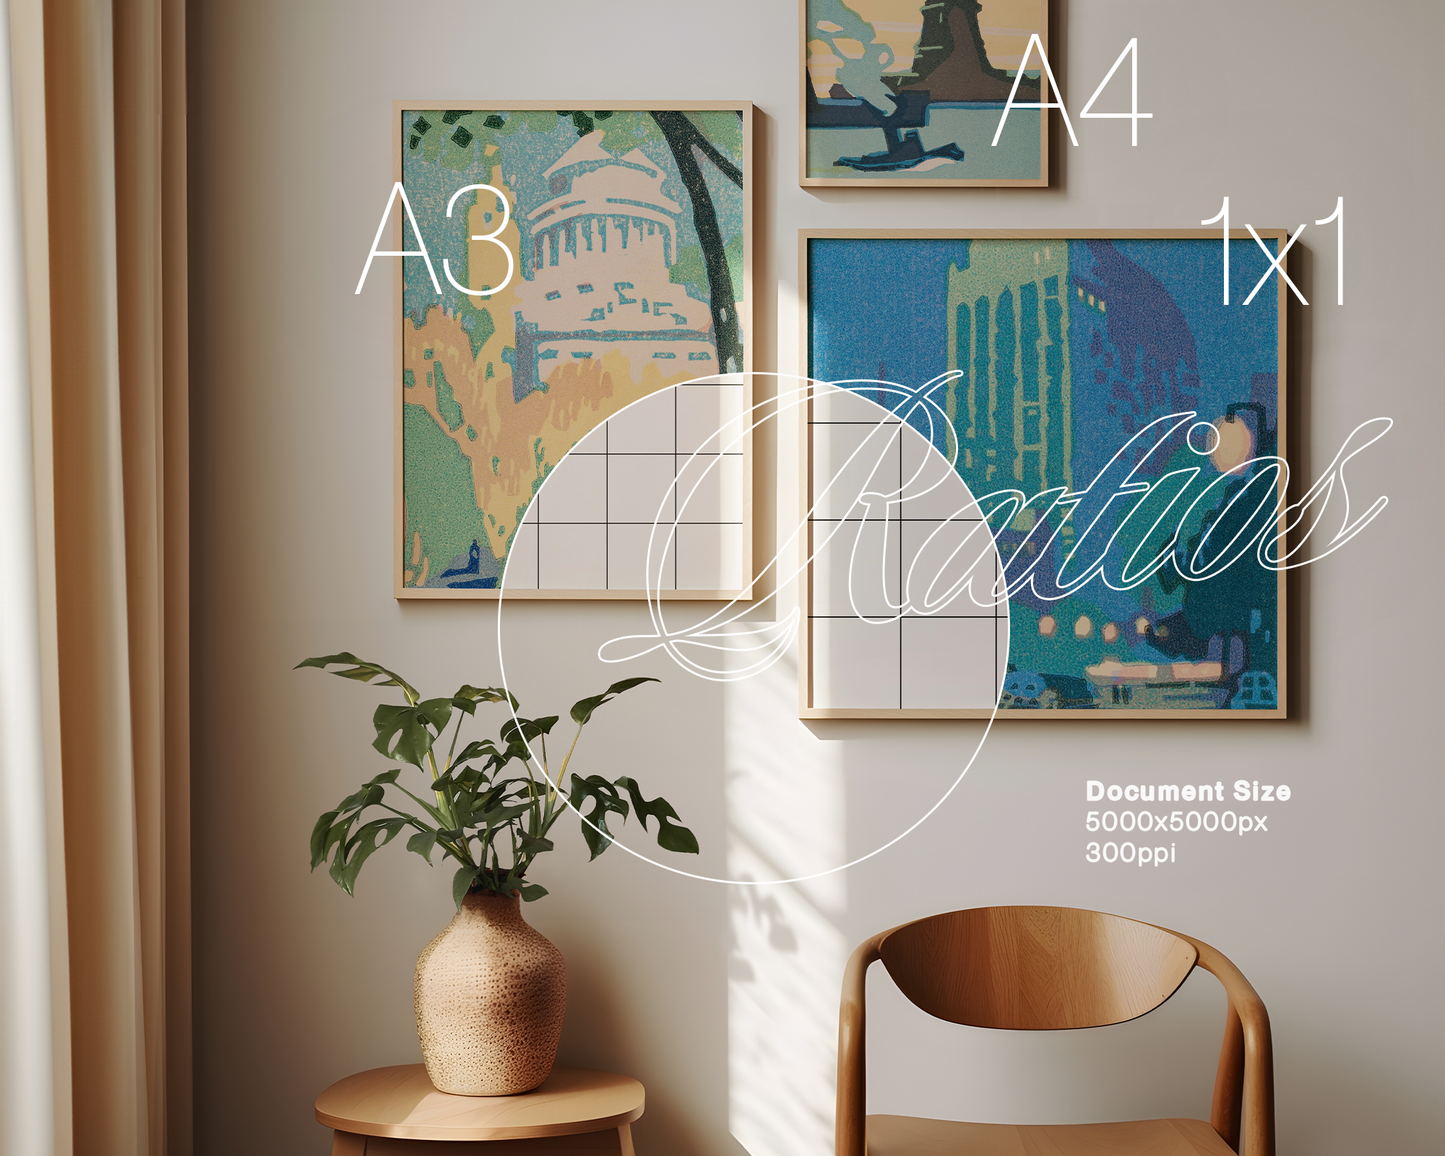 A3, A4 and 1x1 Frame Gallery Wall Sunlight Mockup